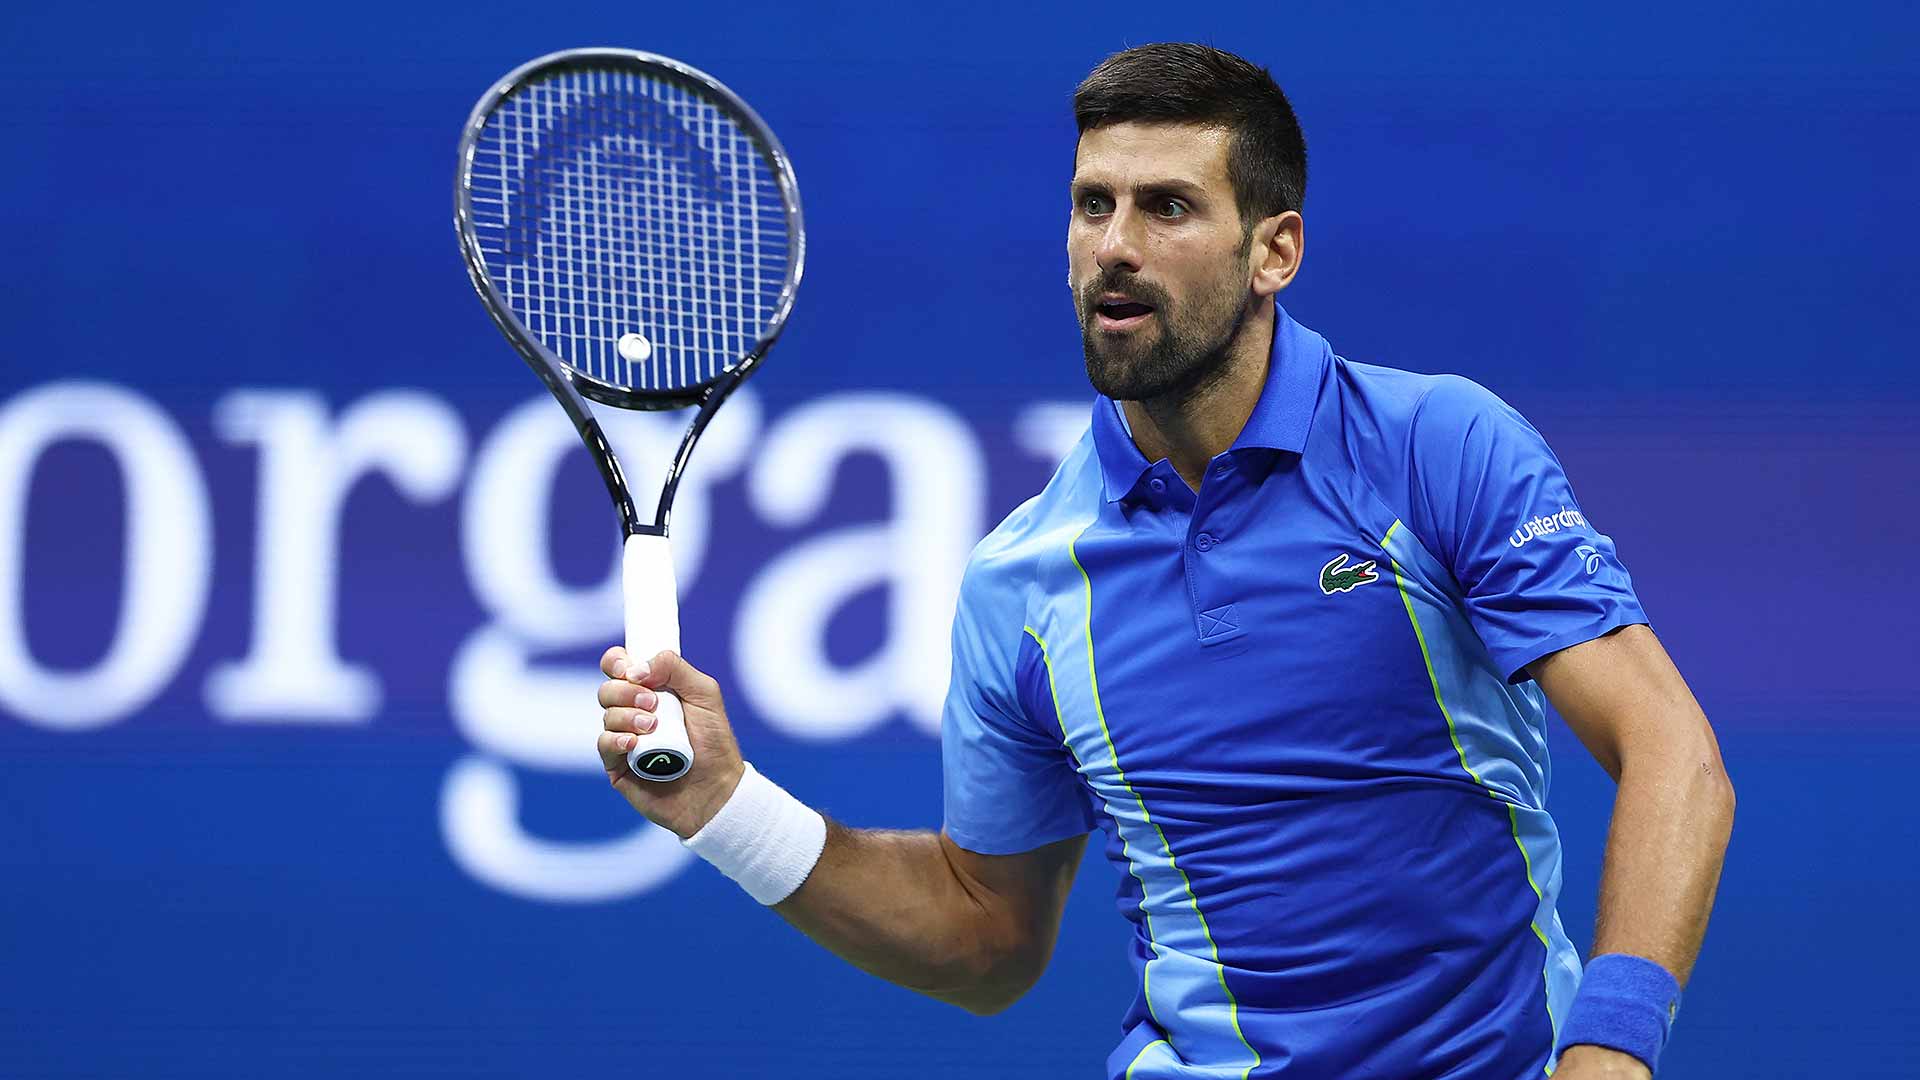 Novak Djokovic has reached the US Open second week in each of his past 15 appearances.